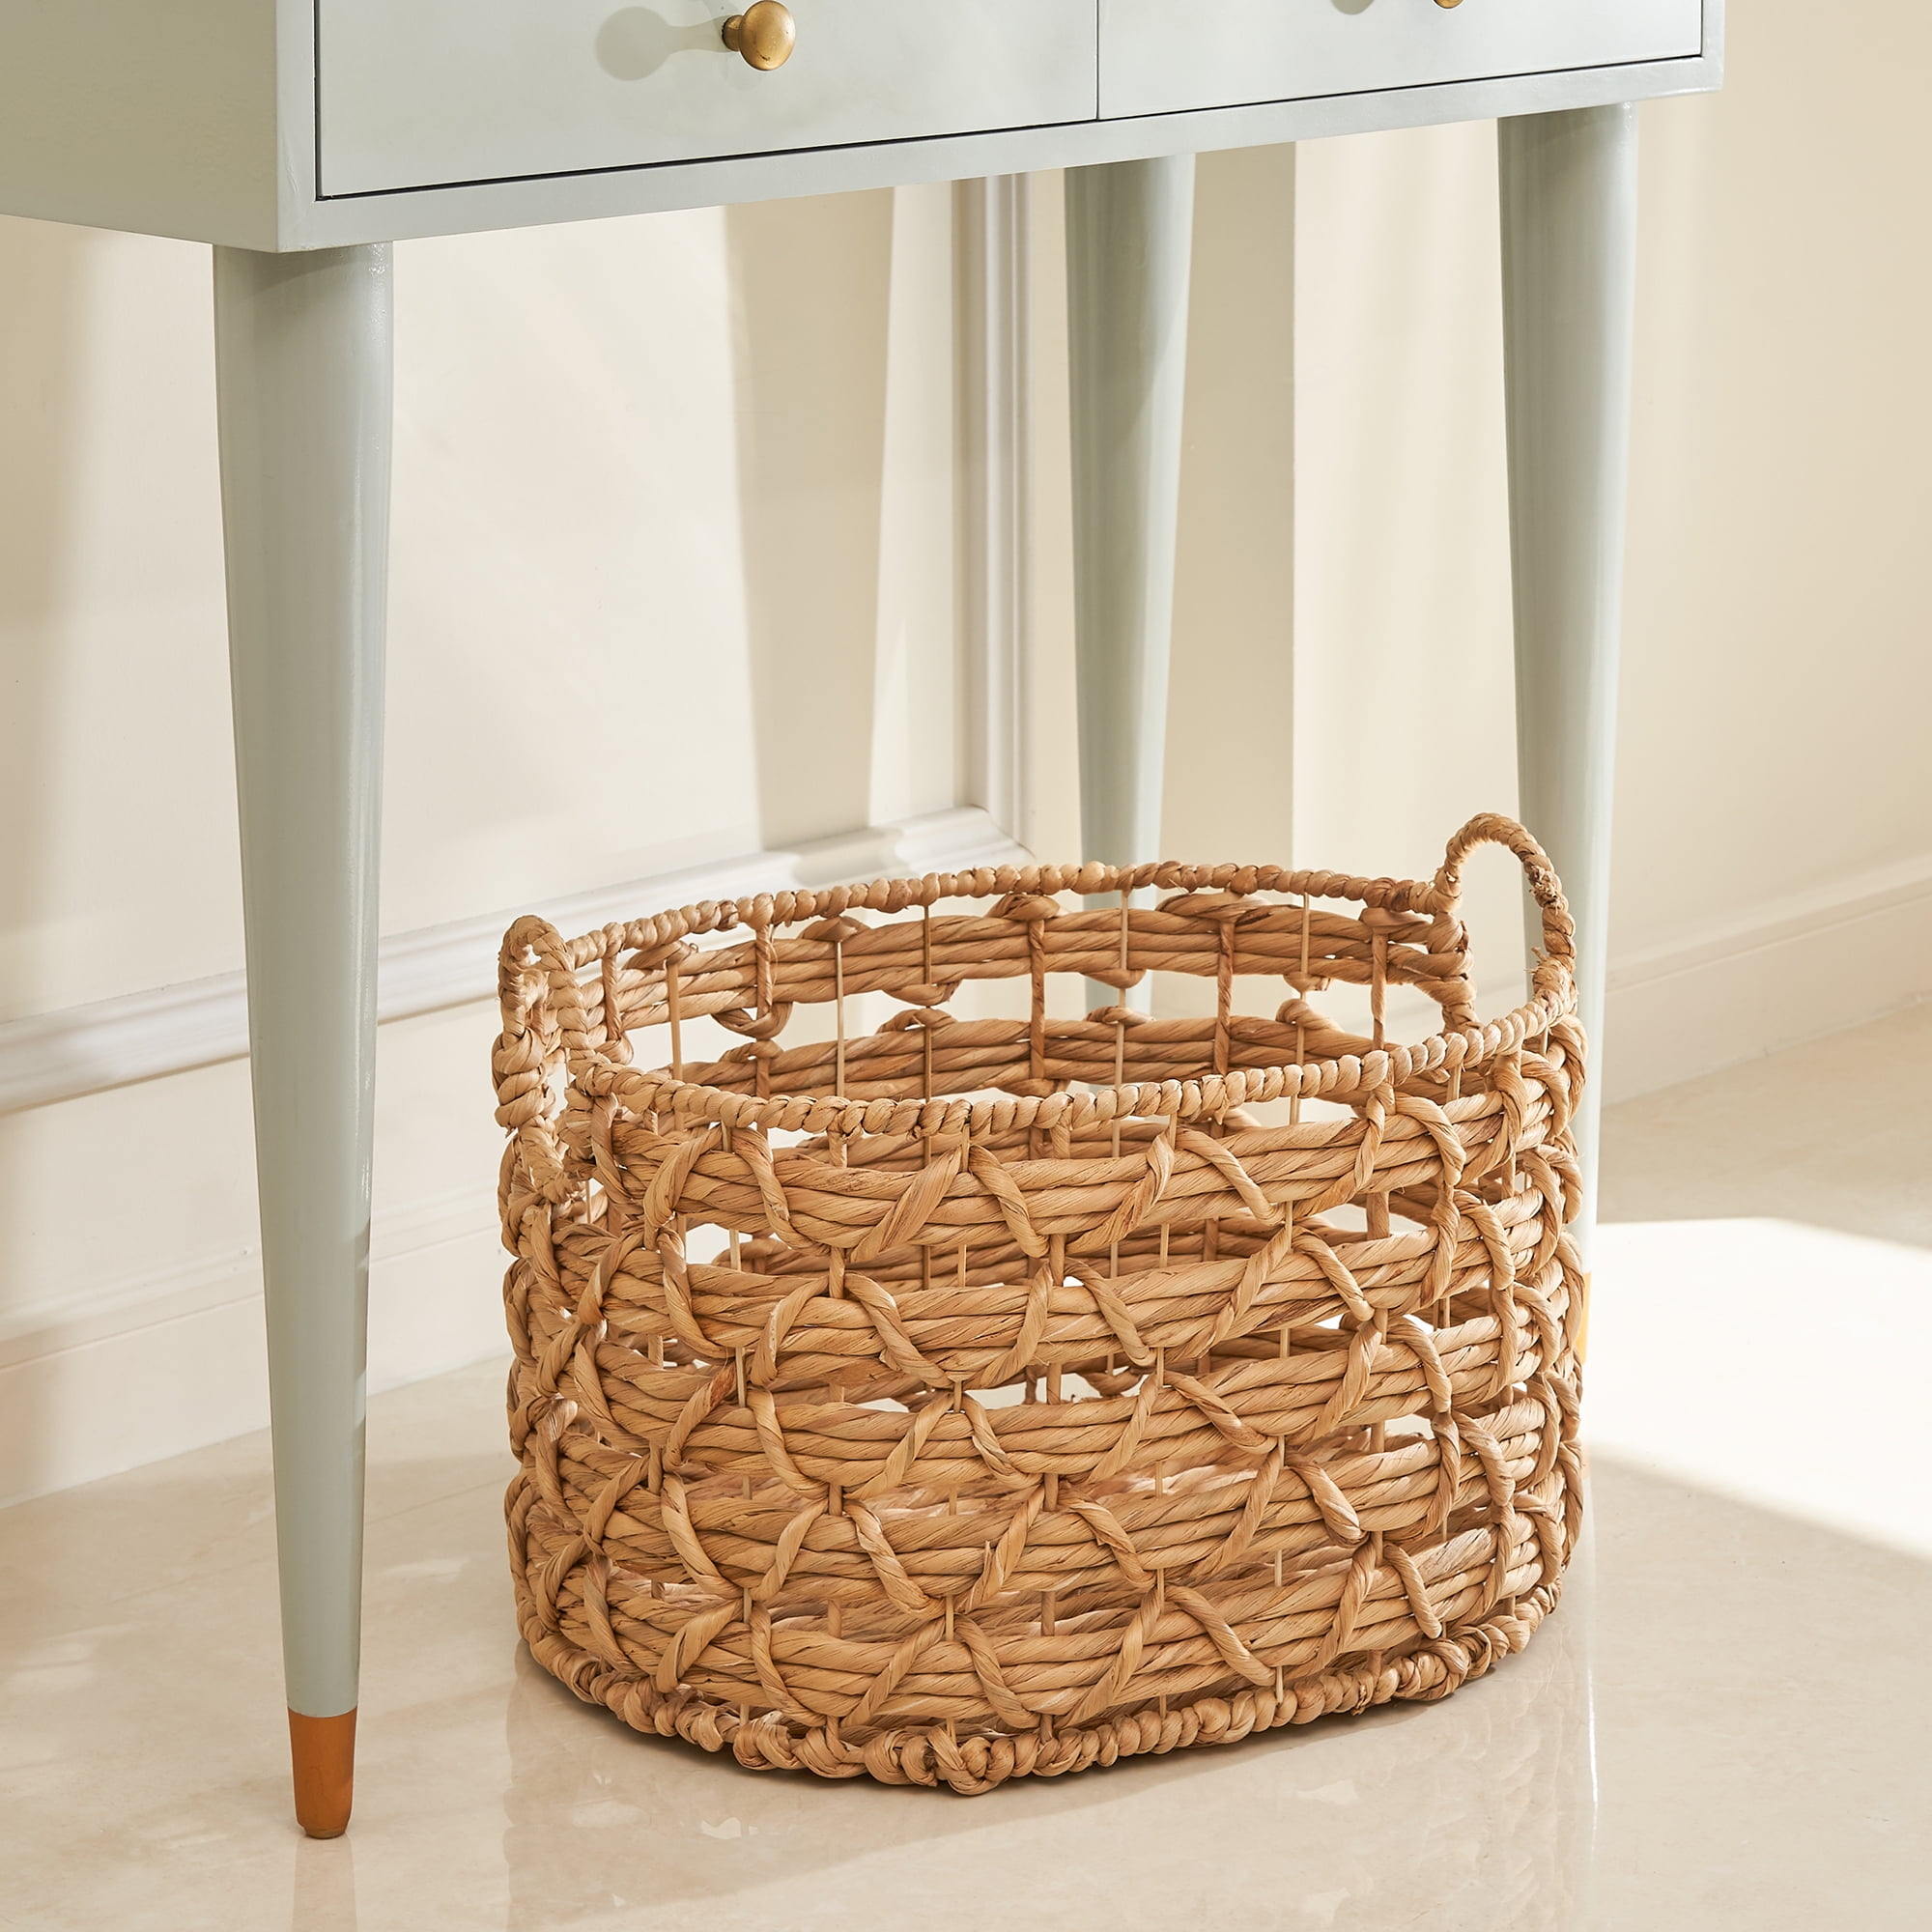 Camila 18-Inch Oval Hand-woven Water Hyacinth Storage and Laundry Basket with Handles- Size M